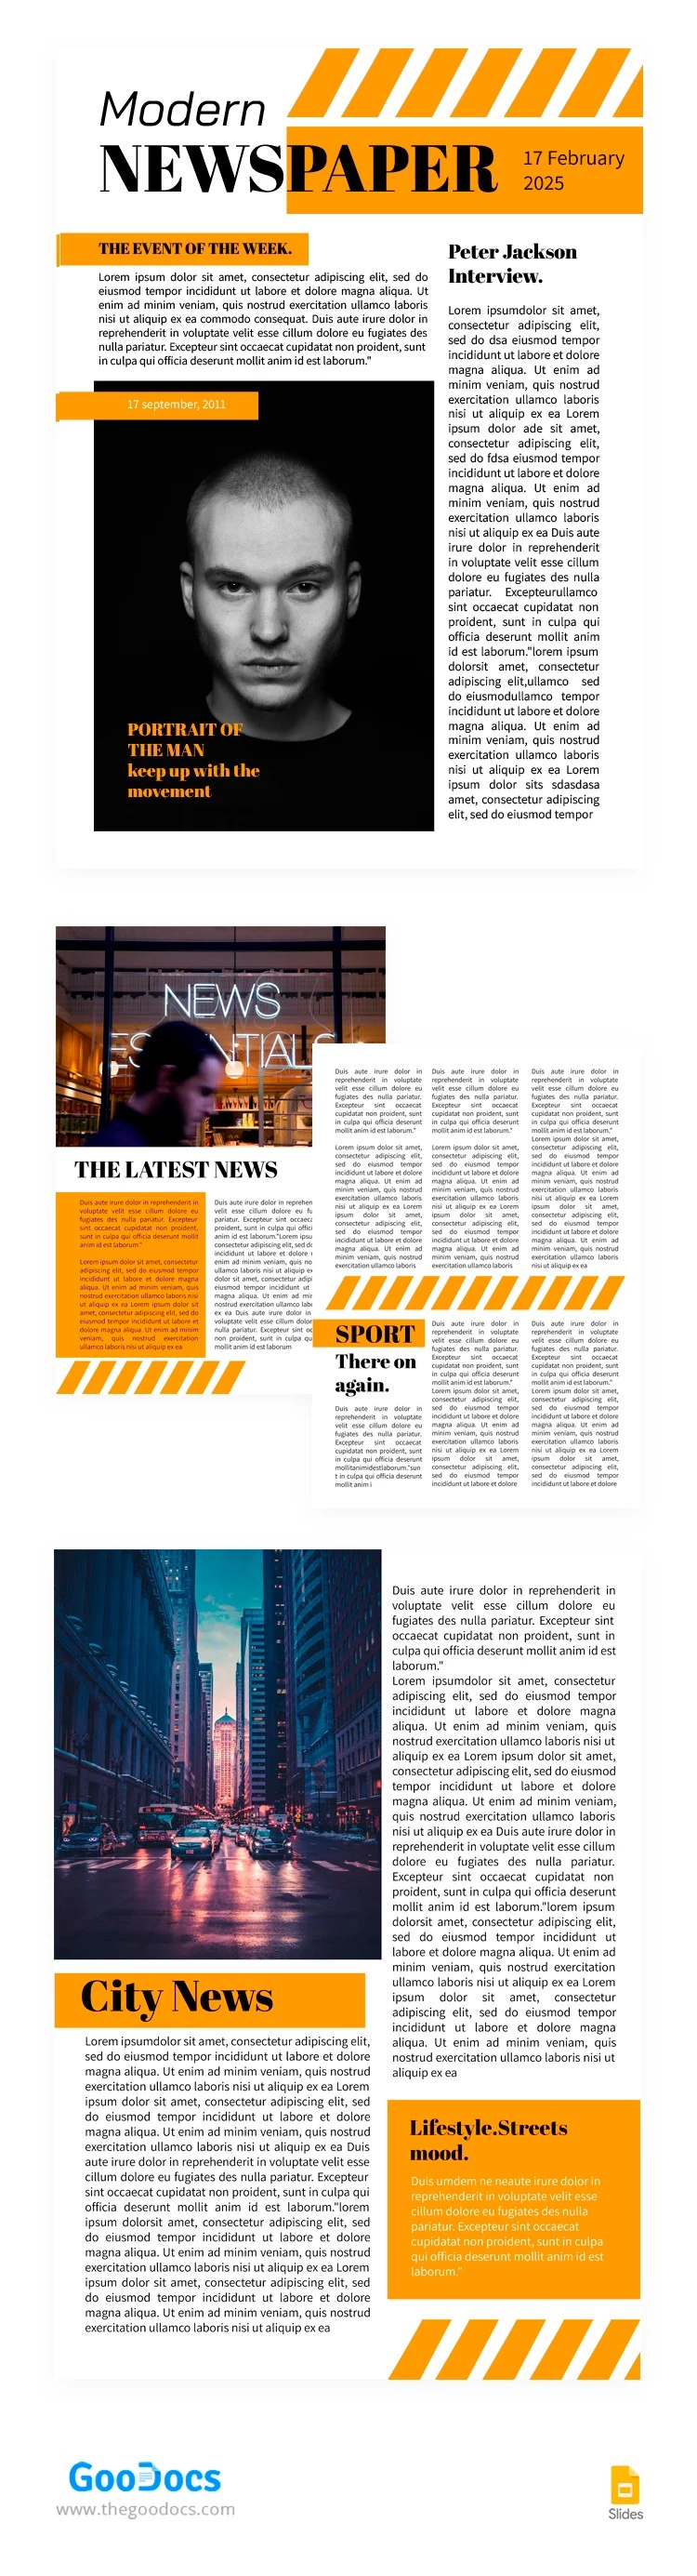 Giornale moderno - free Google Docs Template - 10063523